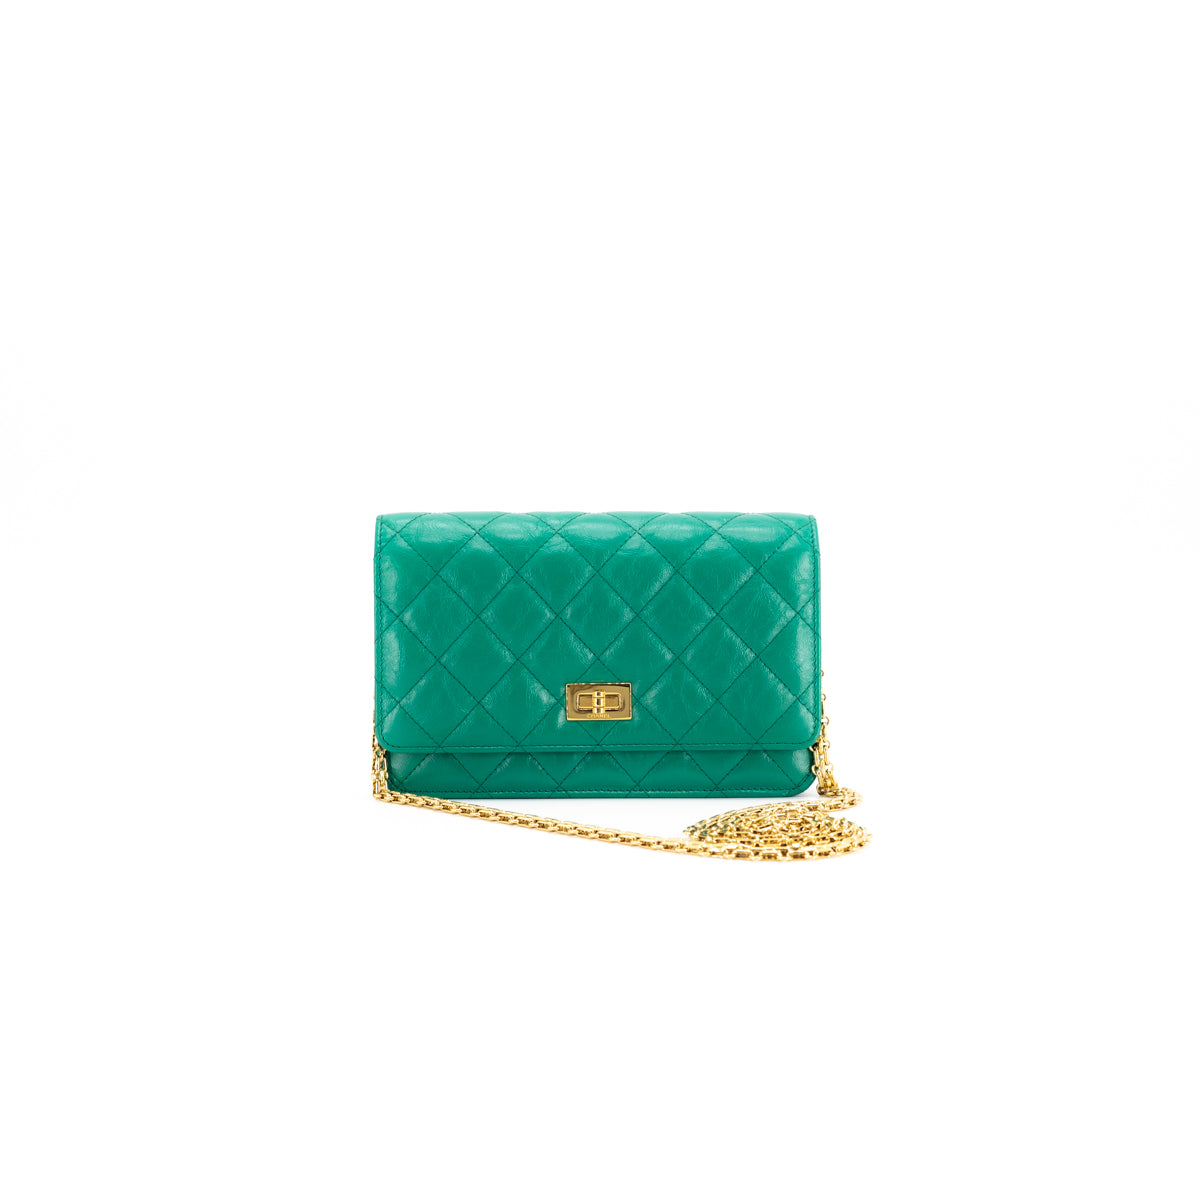 Chanel Reissue Wallet on Chain Emerald Green - THE PURSE AFFAIR